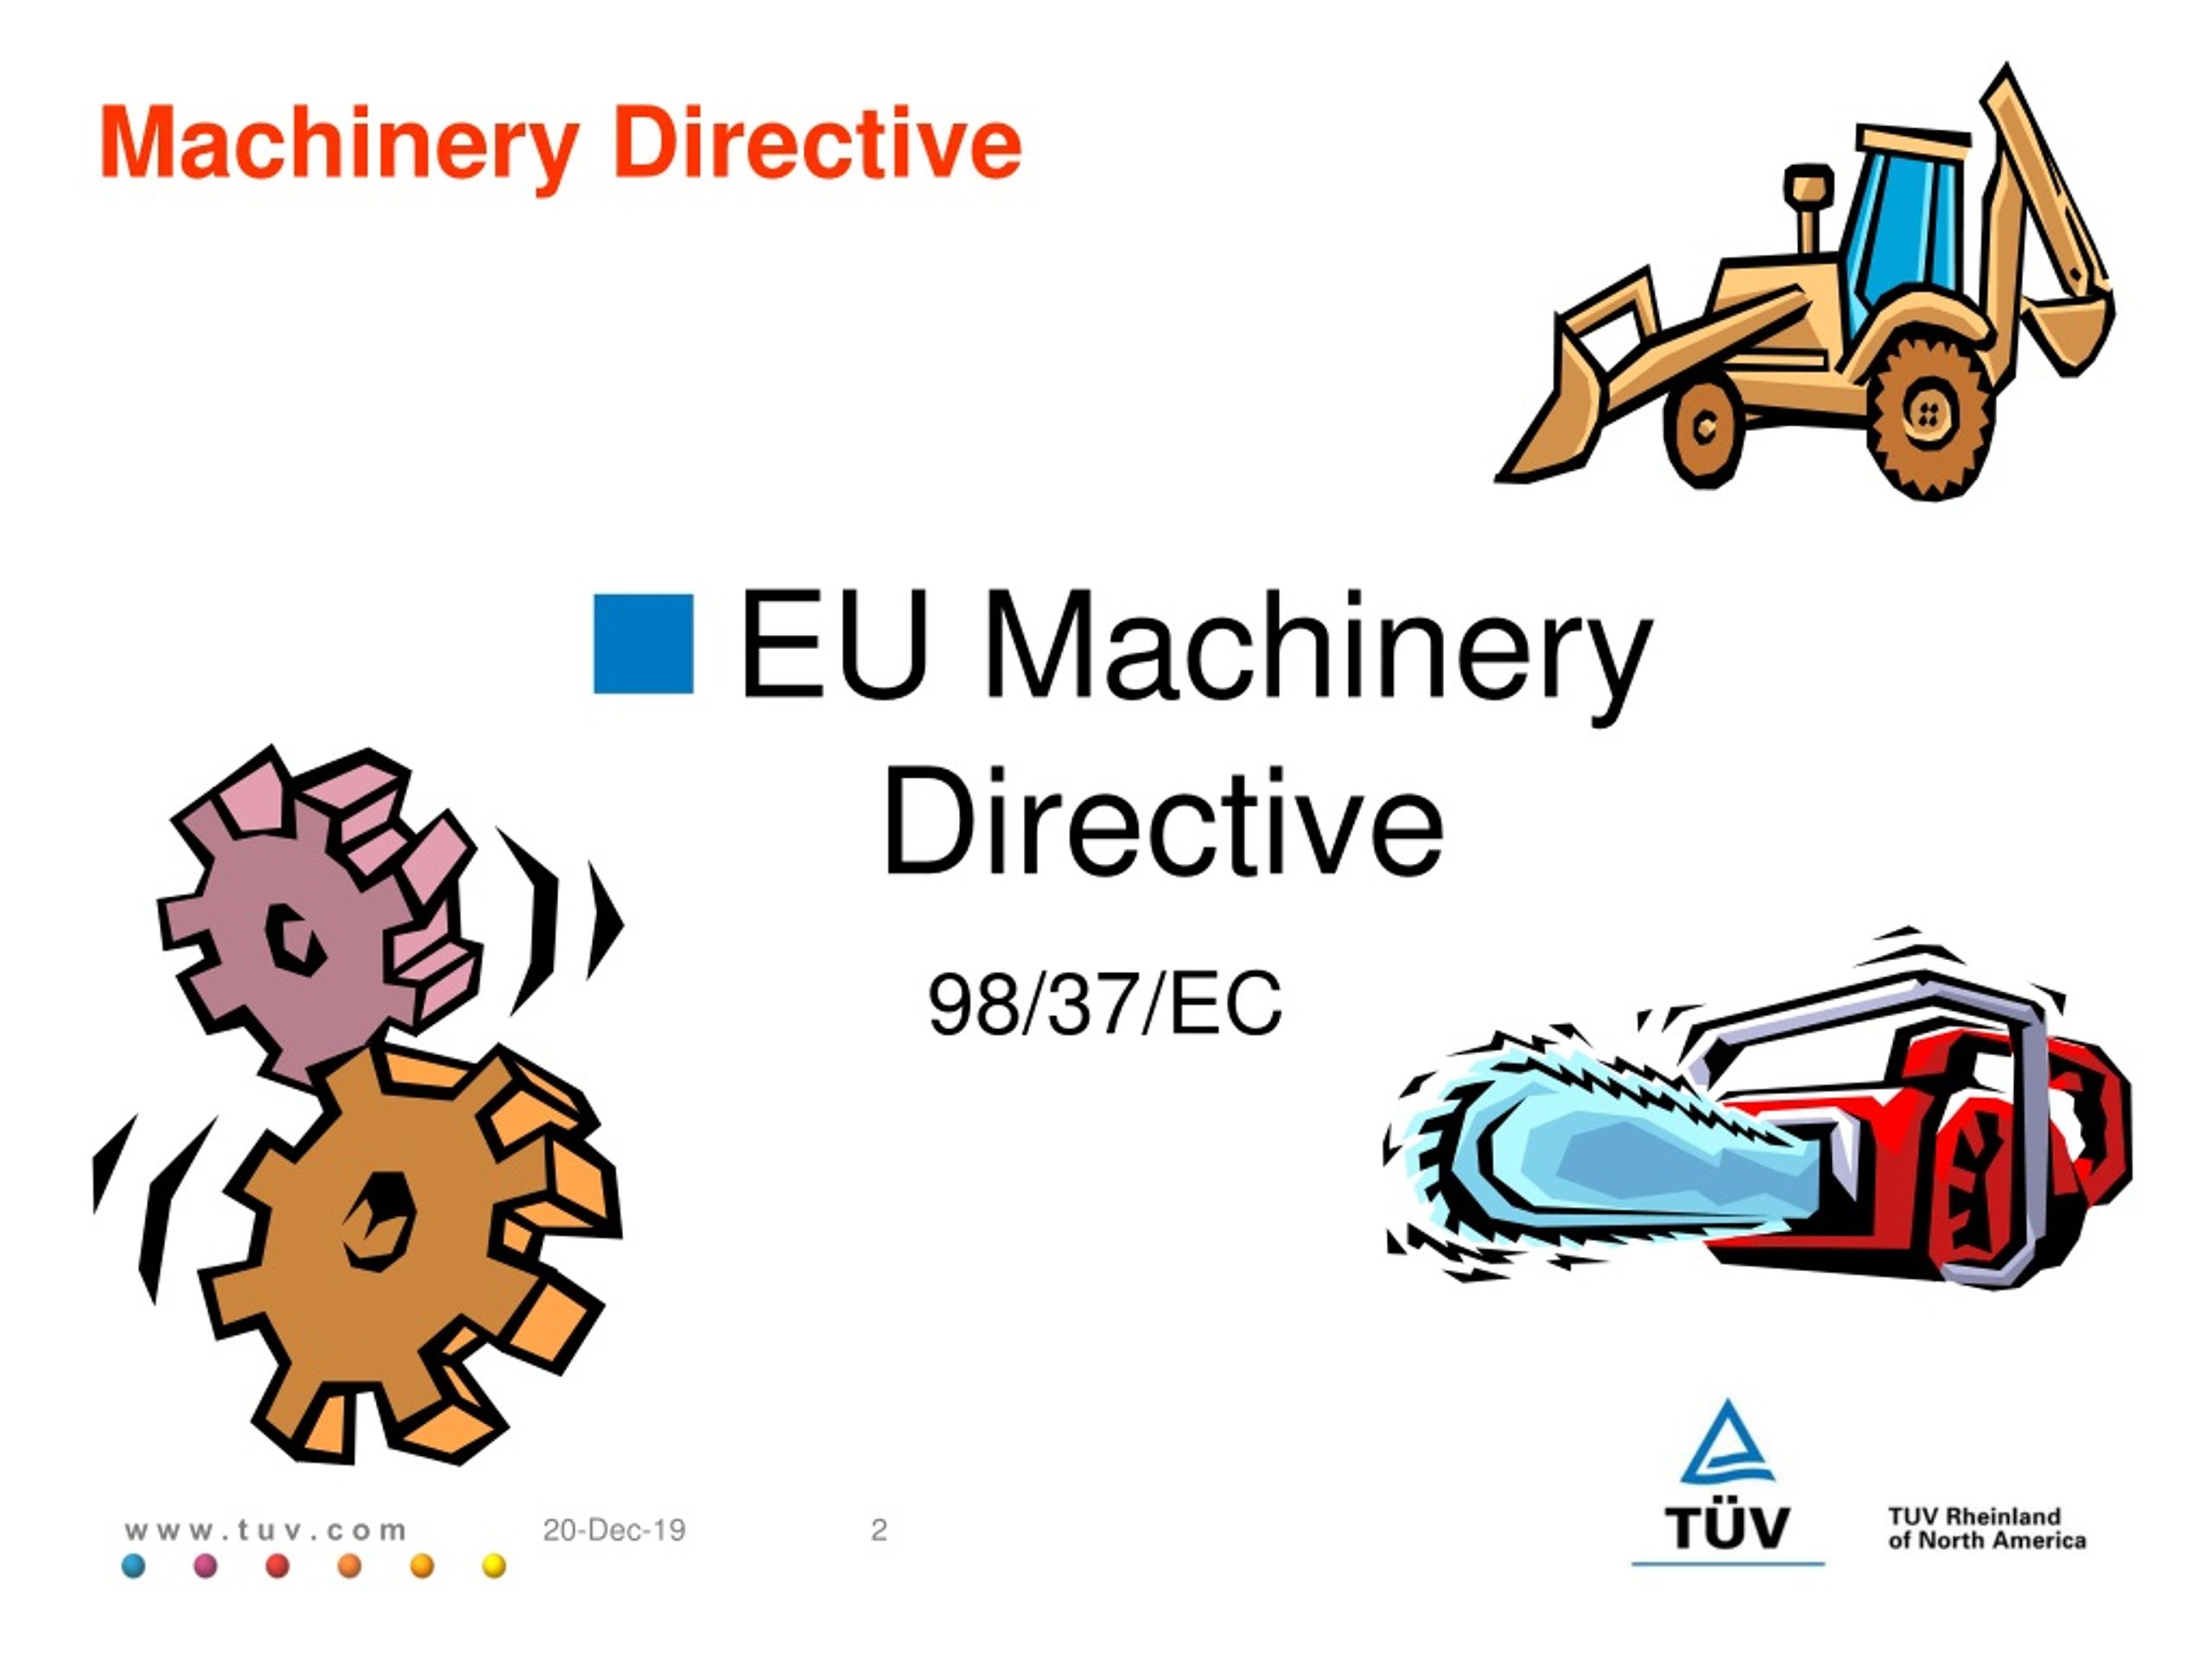 PPT EU Machinery Directive PowerPoint Presentation, free download